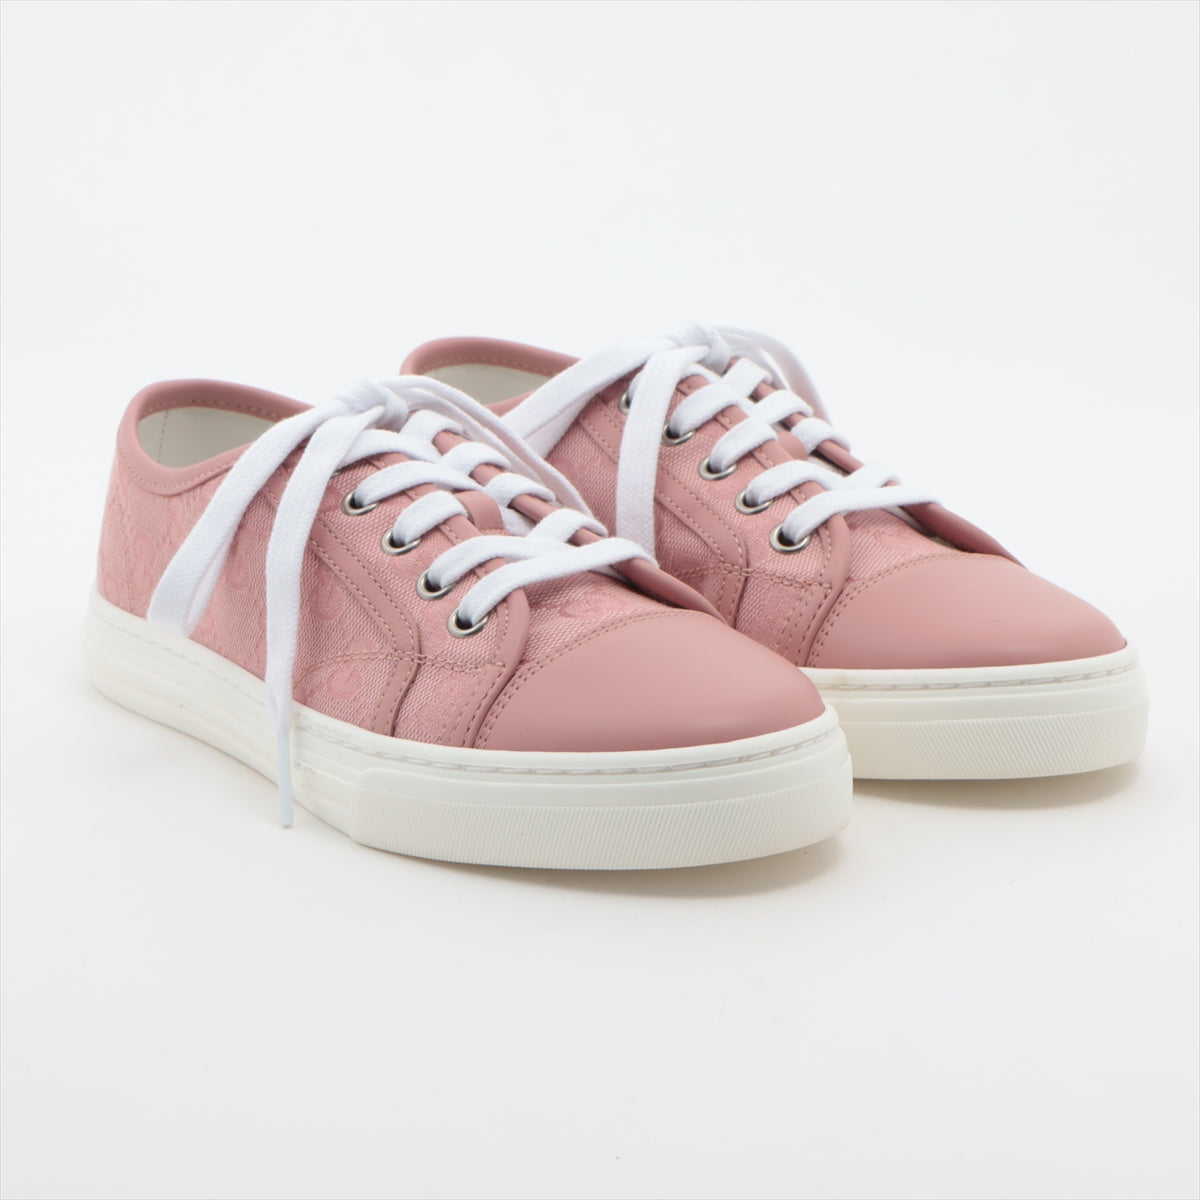 Gucci GG Canvas Canvas & Leather Sneakers 35 Ladies' Pink 426187 Replacement Laces Included